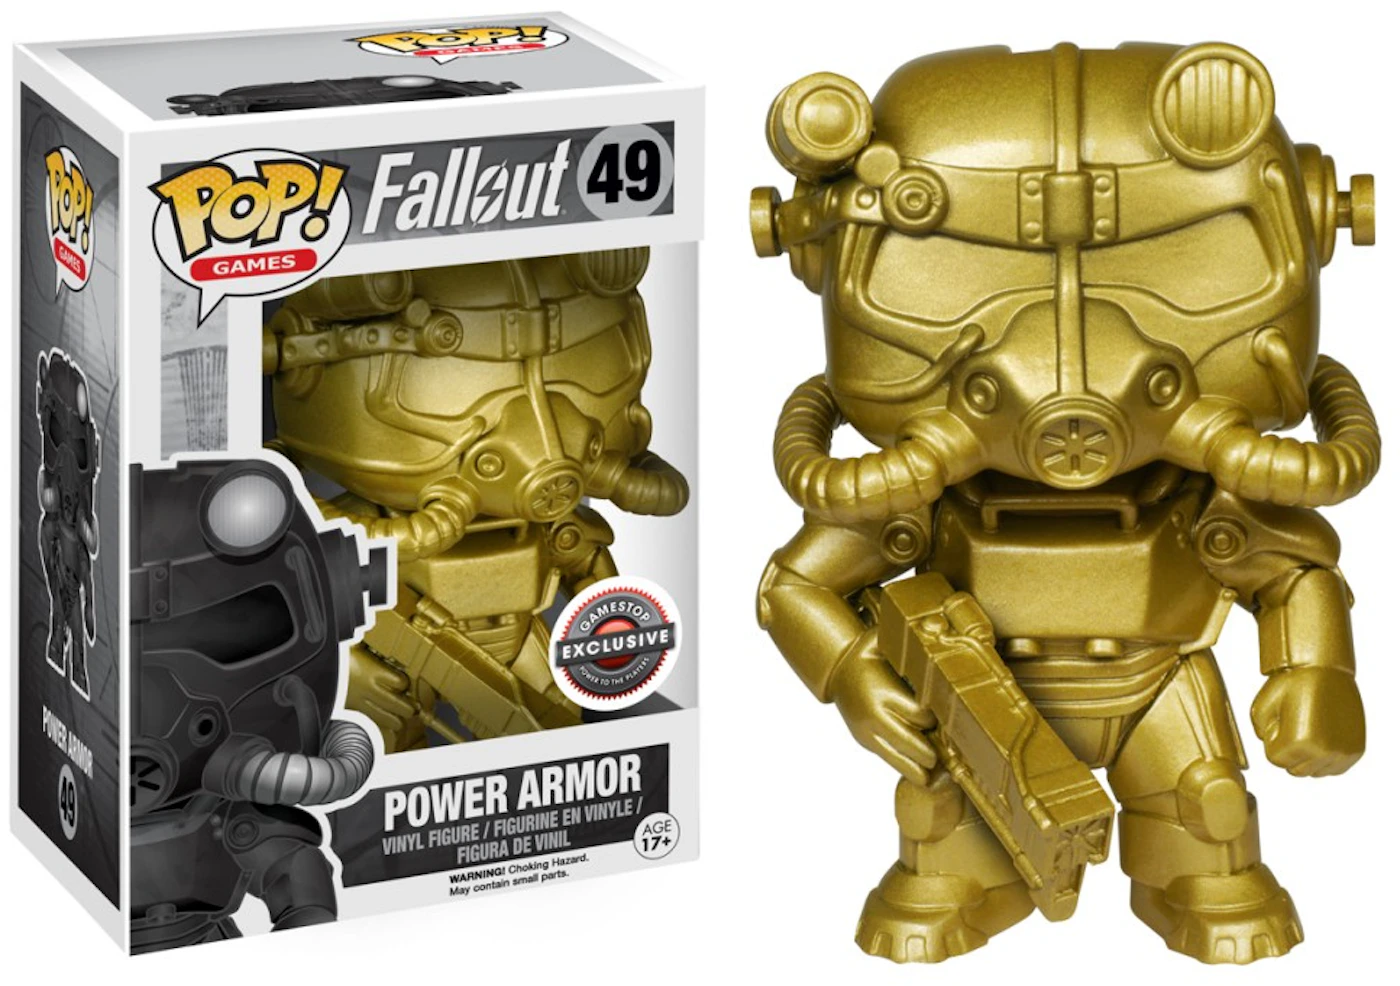 Pop! Games Fallout Power Armor (Gold) (Chase) Exclusive Figure - US